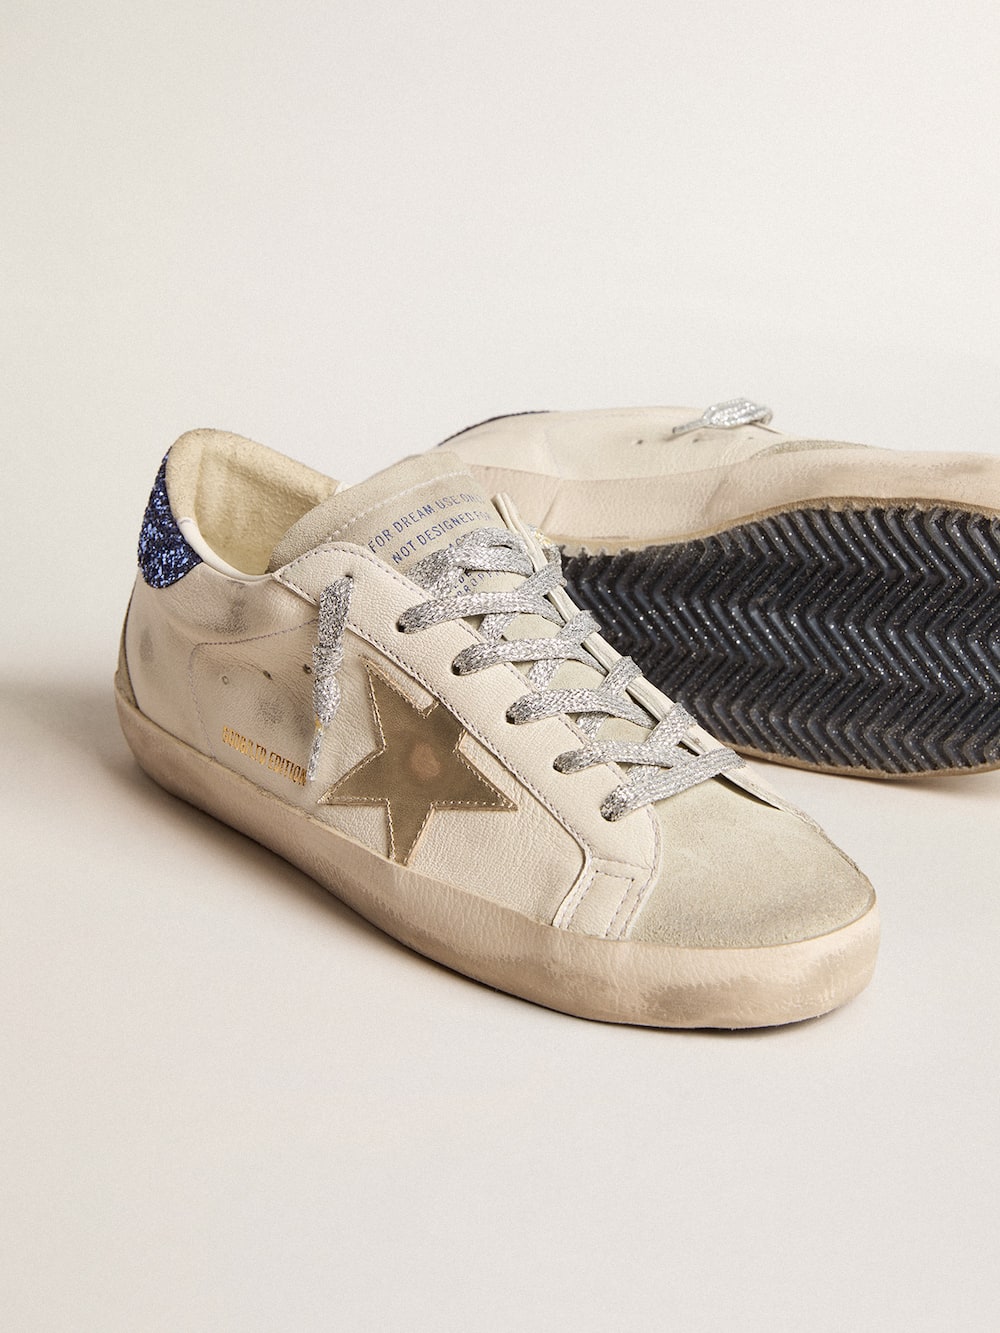 Golden Goose - Women's Super-Star LTD in nappa leather with platinum star and blue glitter heel tab in 